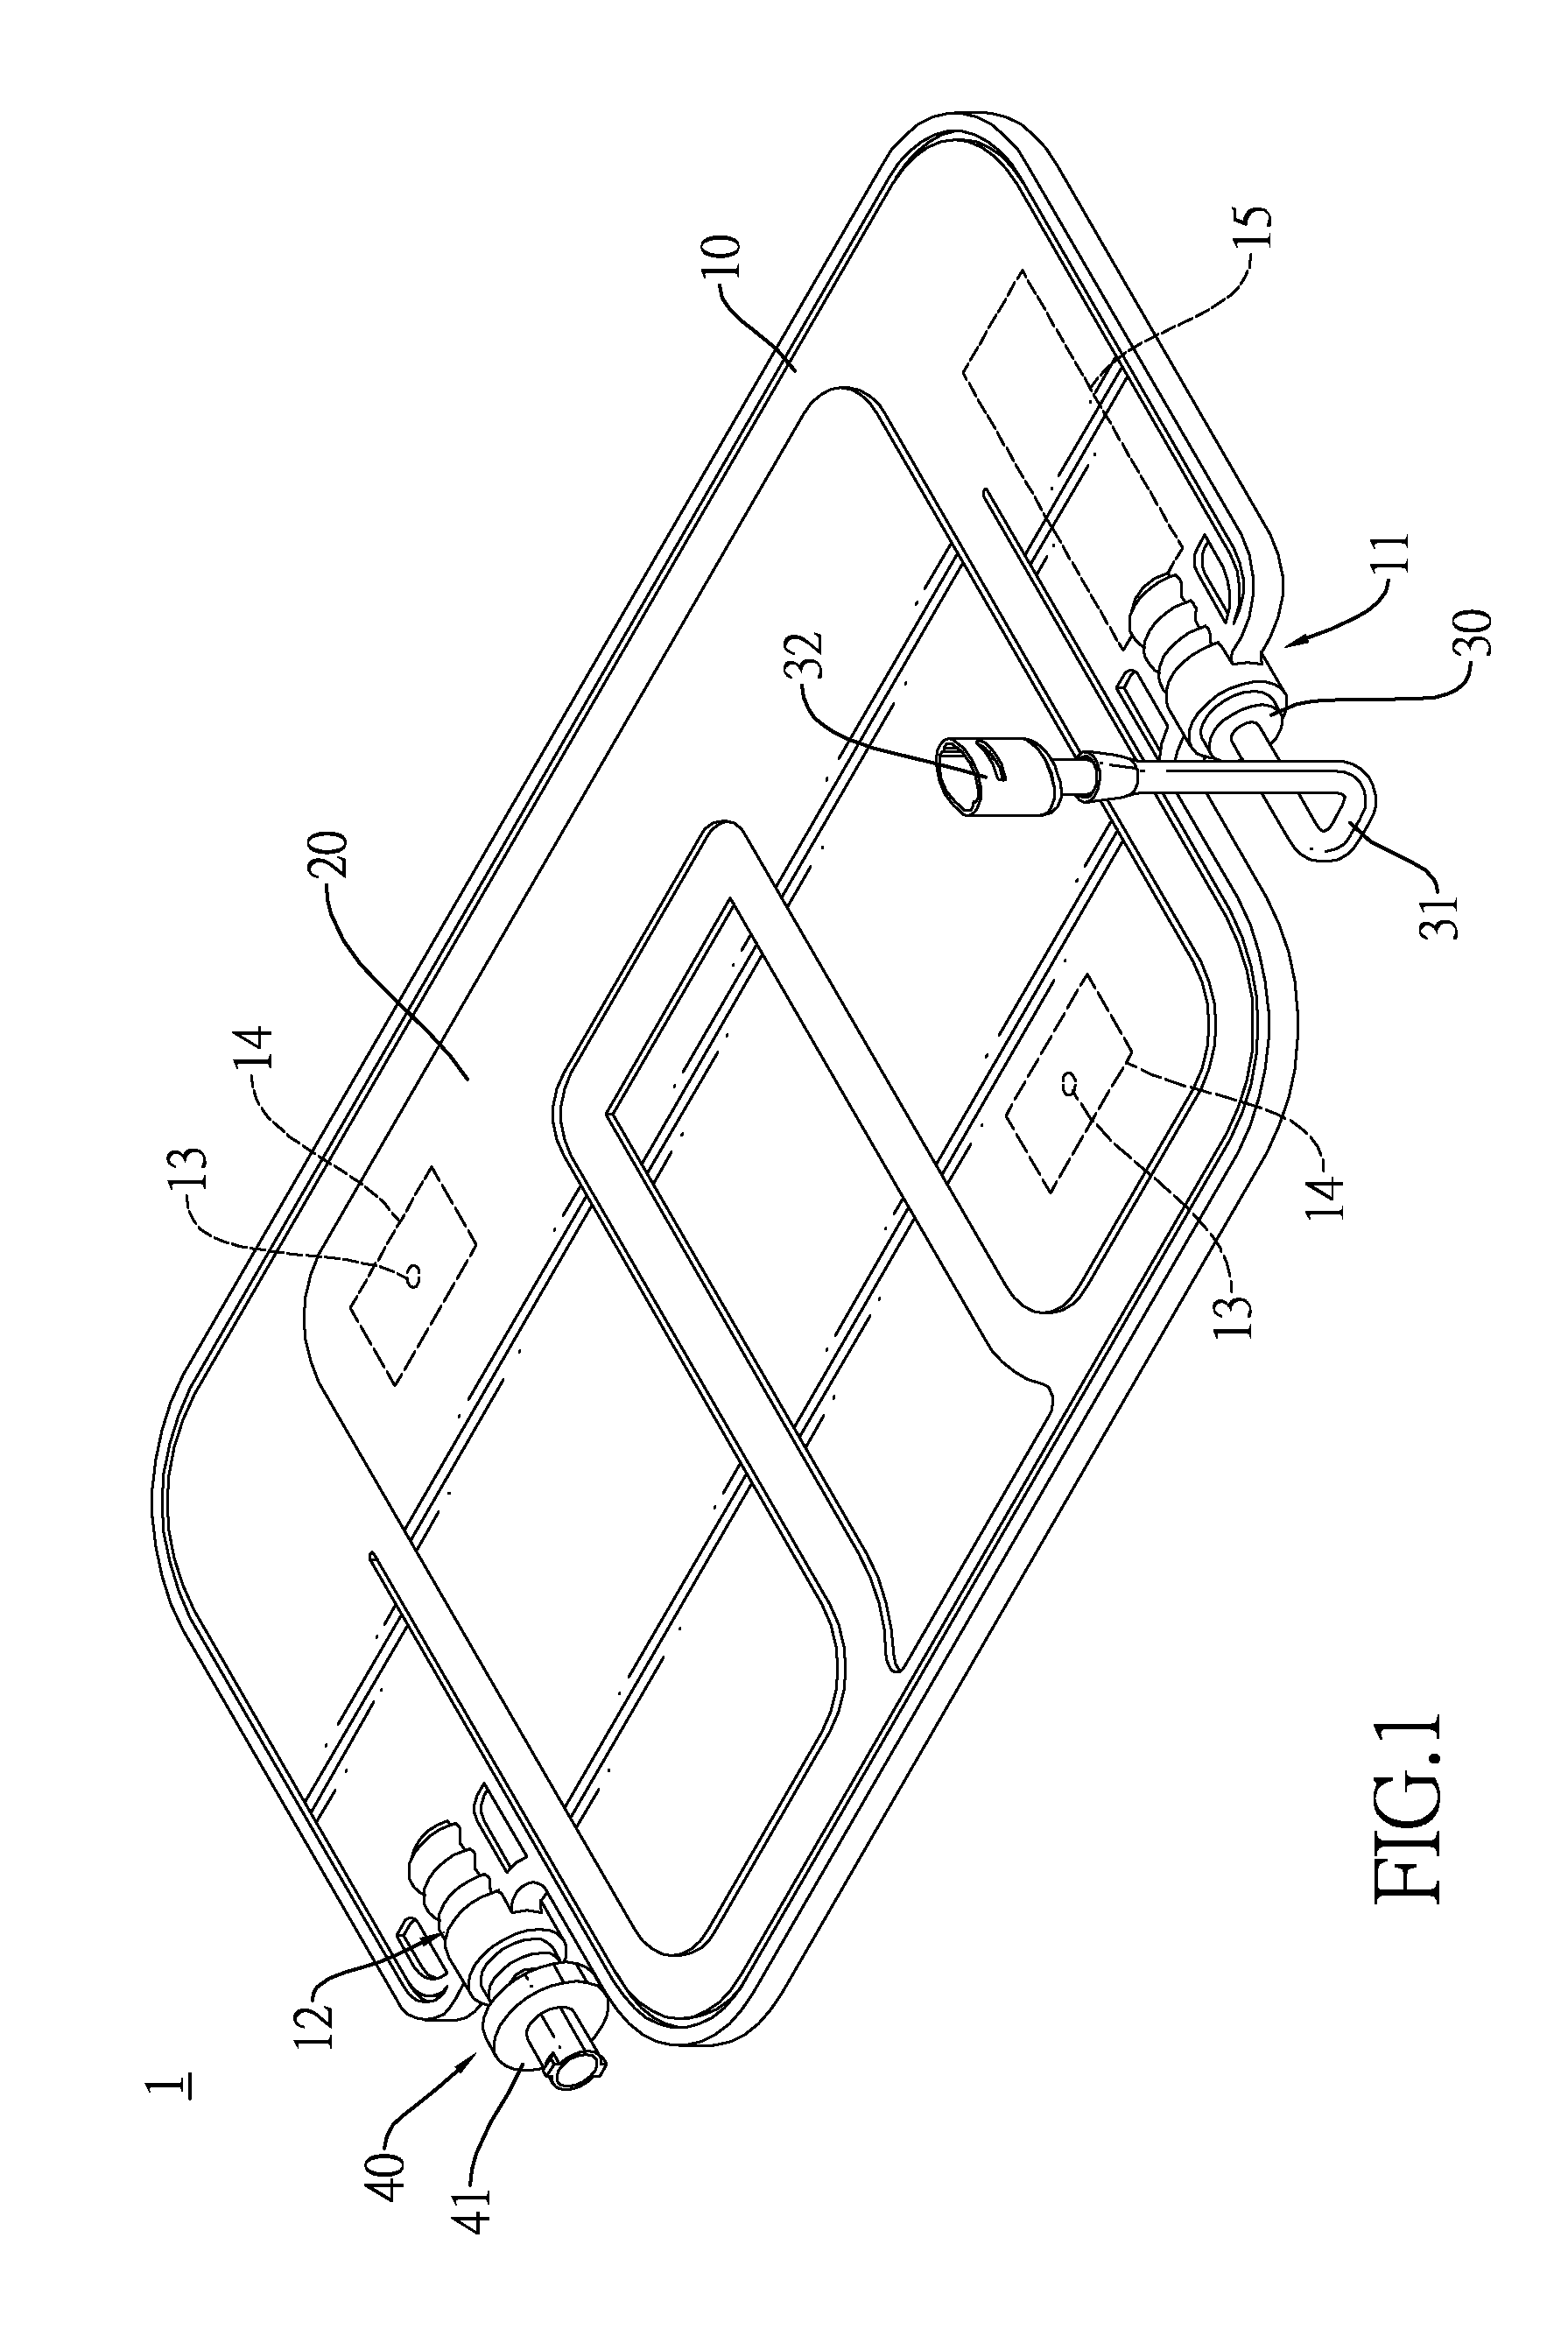 Collector for a negative pressure wound therapy system and its combination